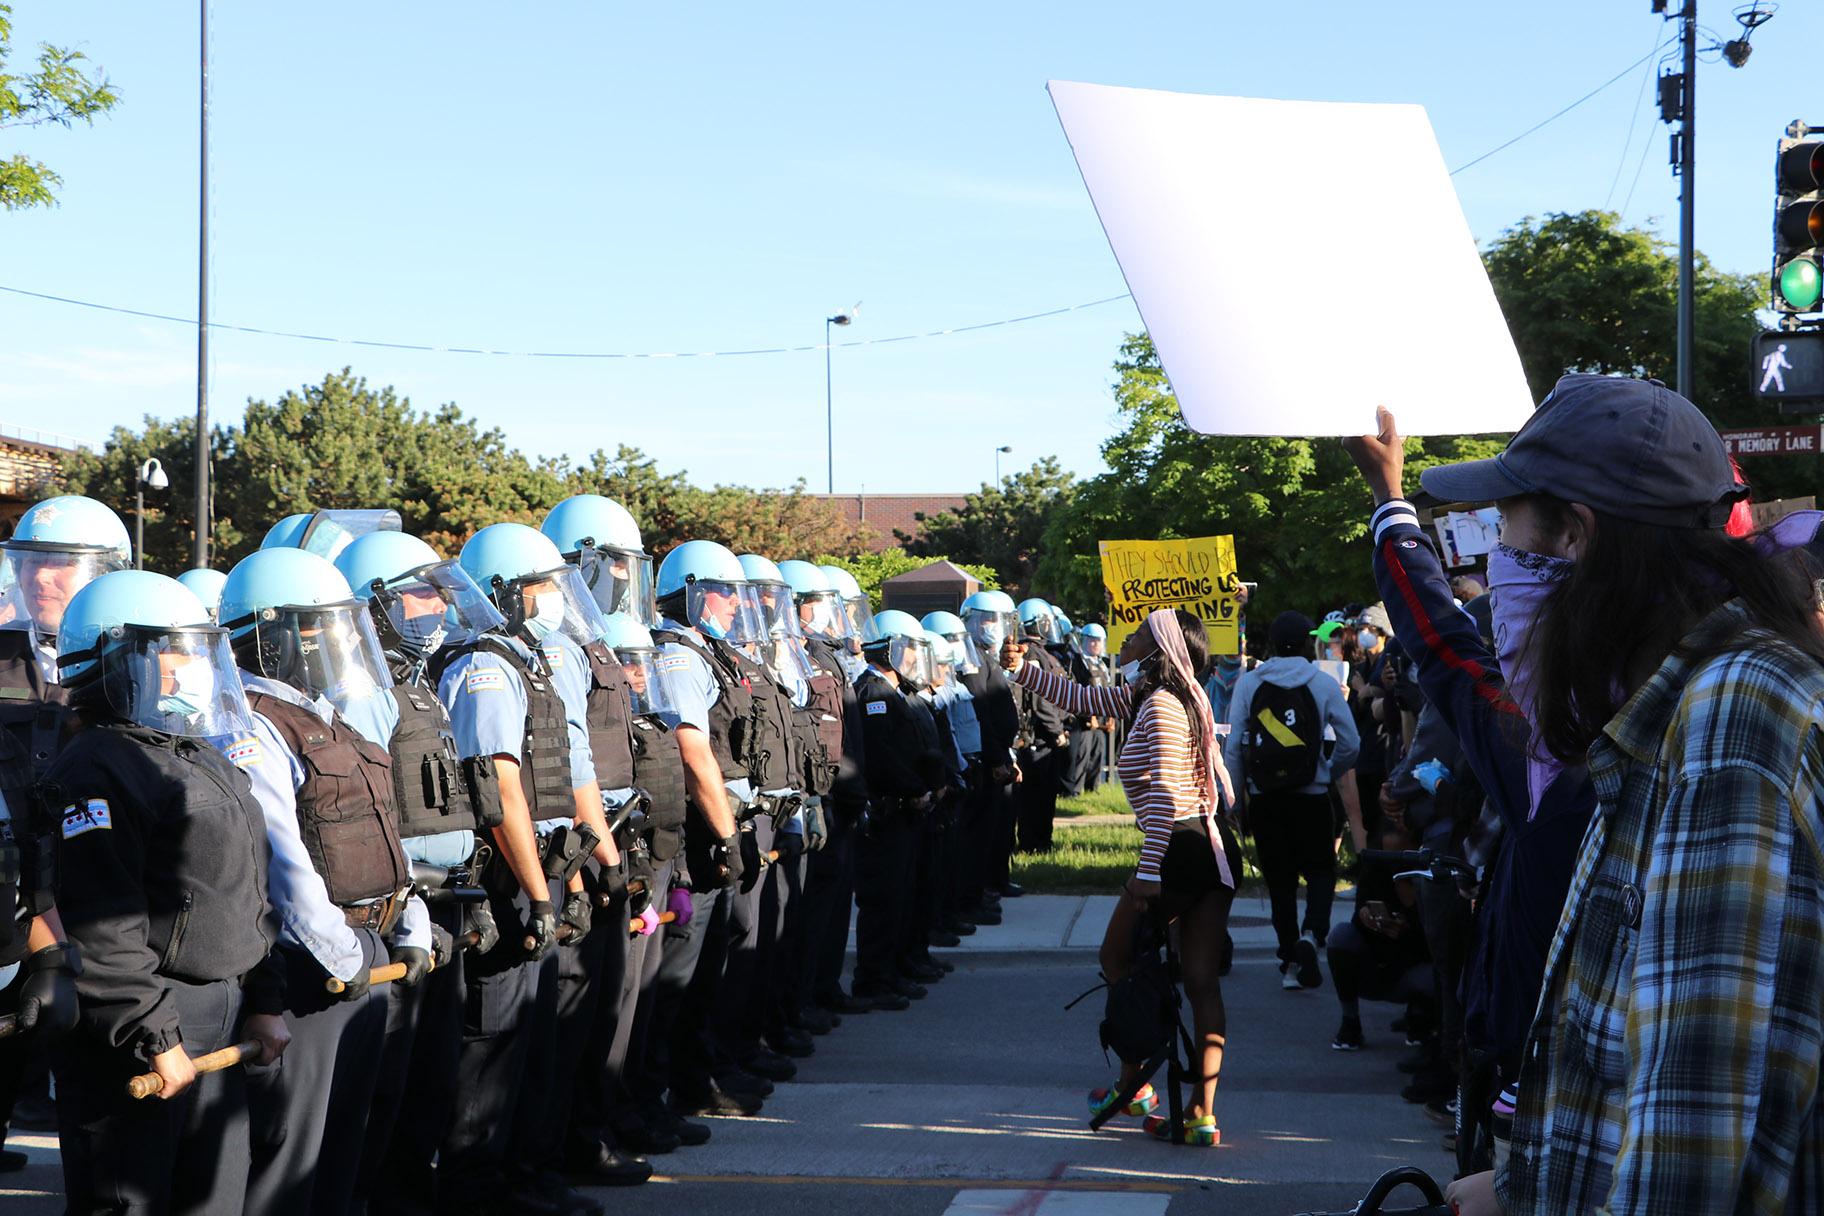 Protesters yell at a line of police officers at State and 35th streets, about 3 miles south of the Loop, where police set up a blockade. (Evan Garcia / WTTW News)